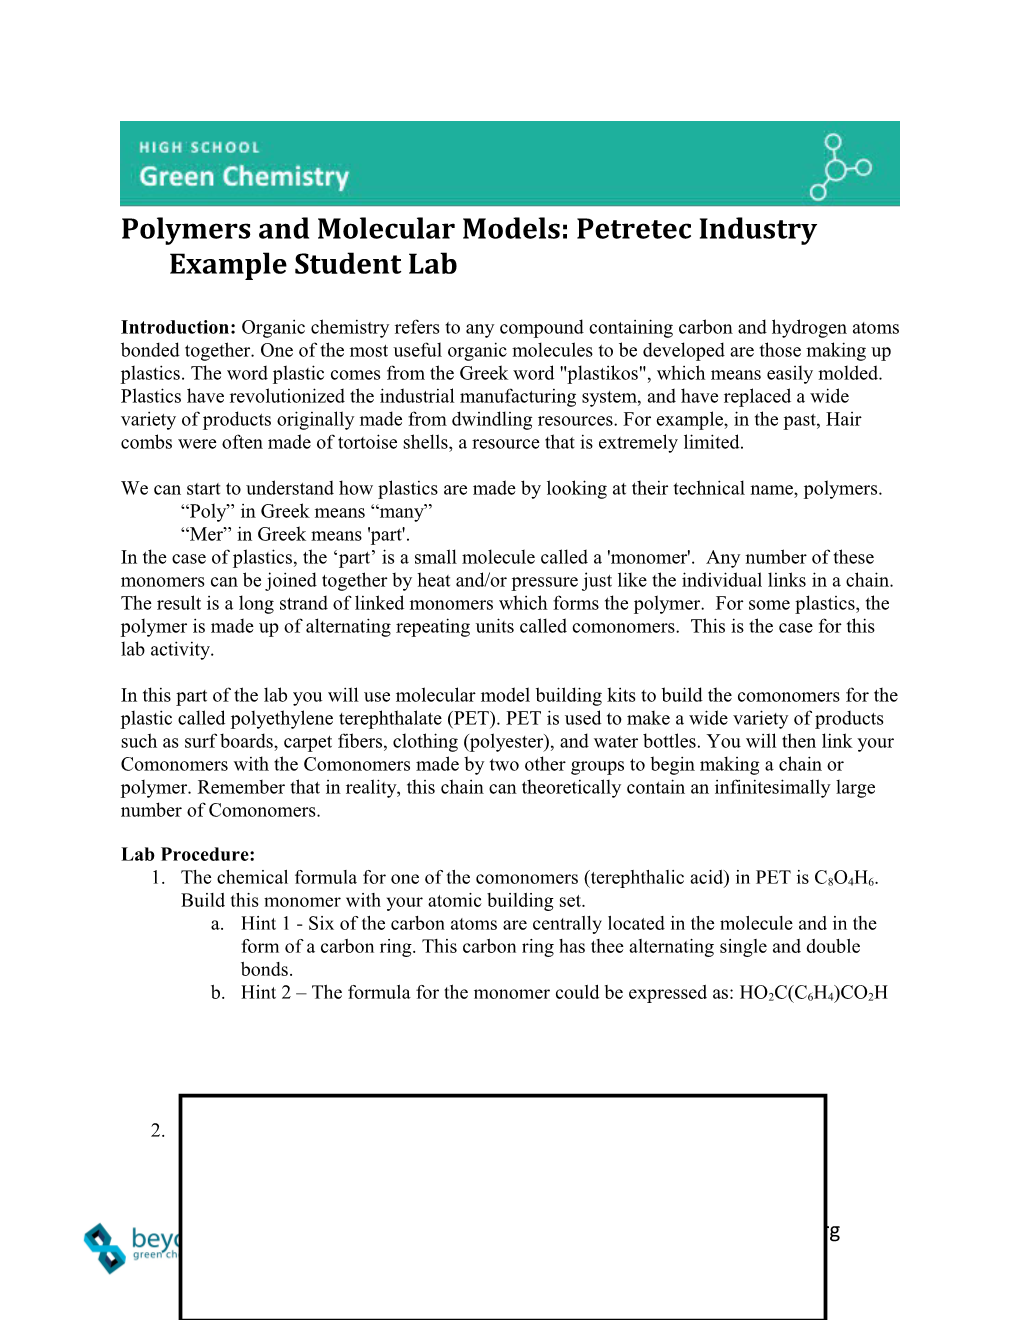 Polymers and Molecular Models: Petretec Industry Example